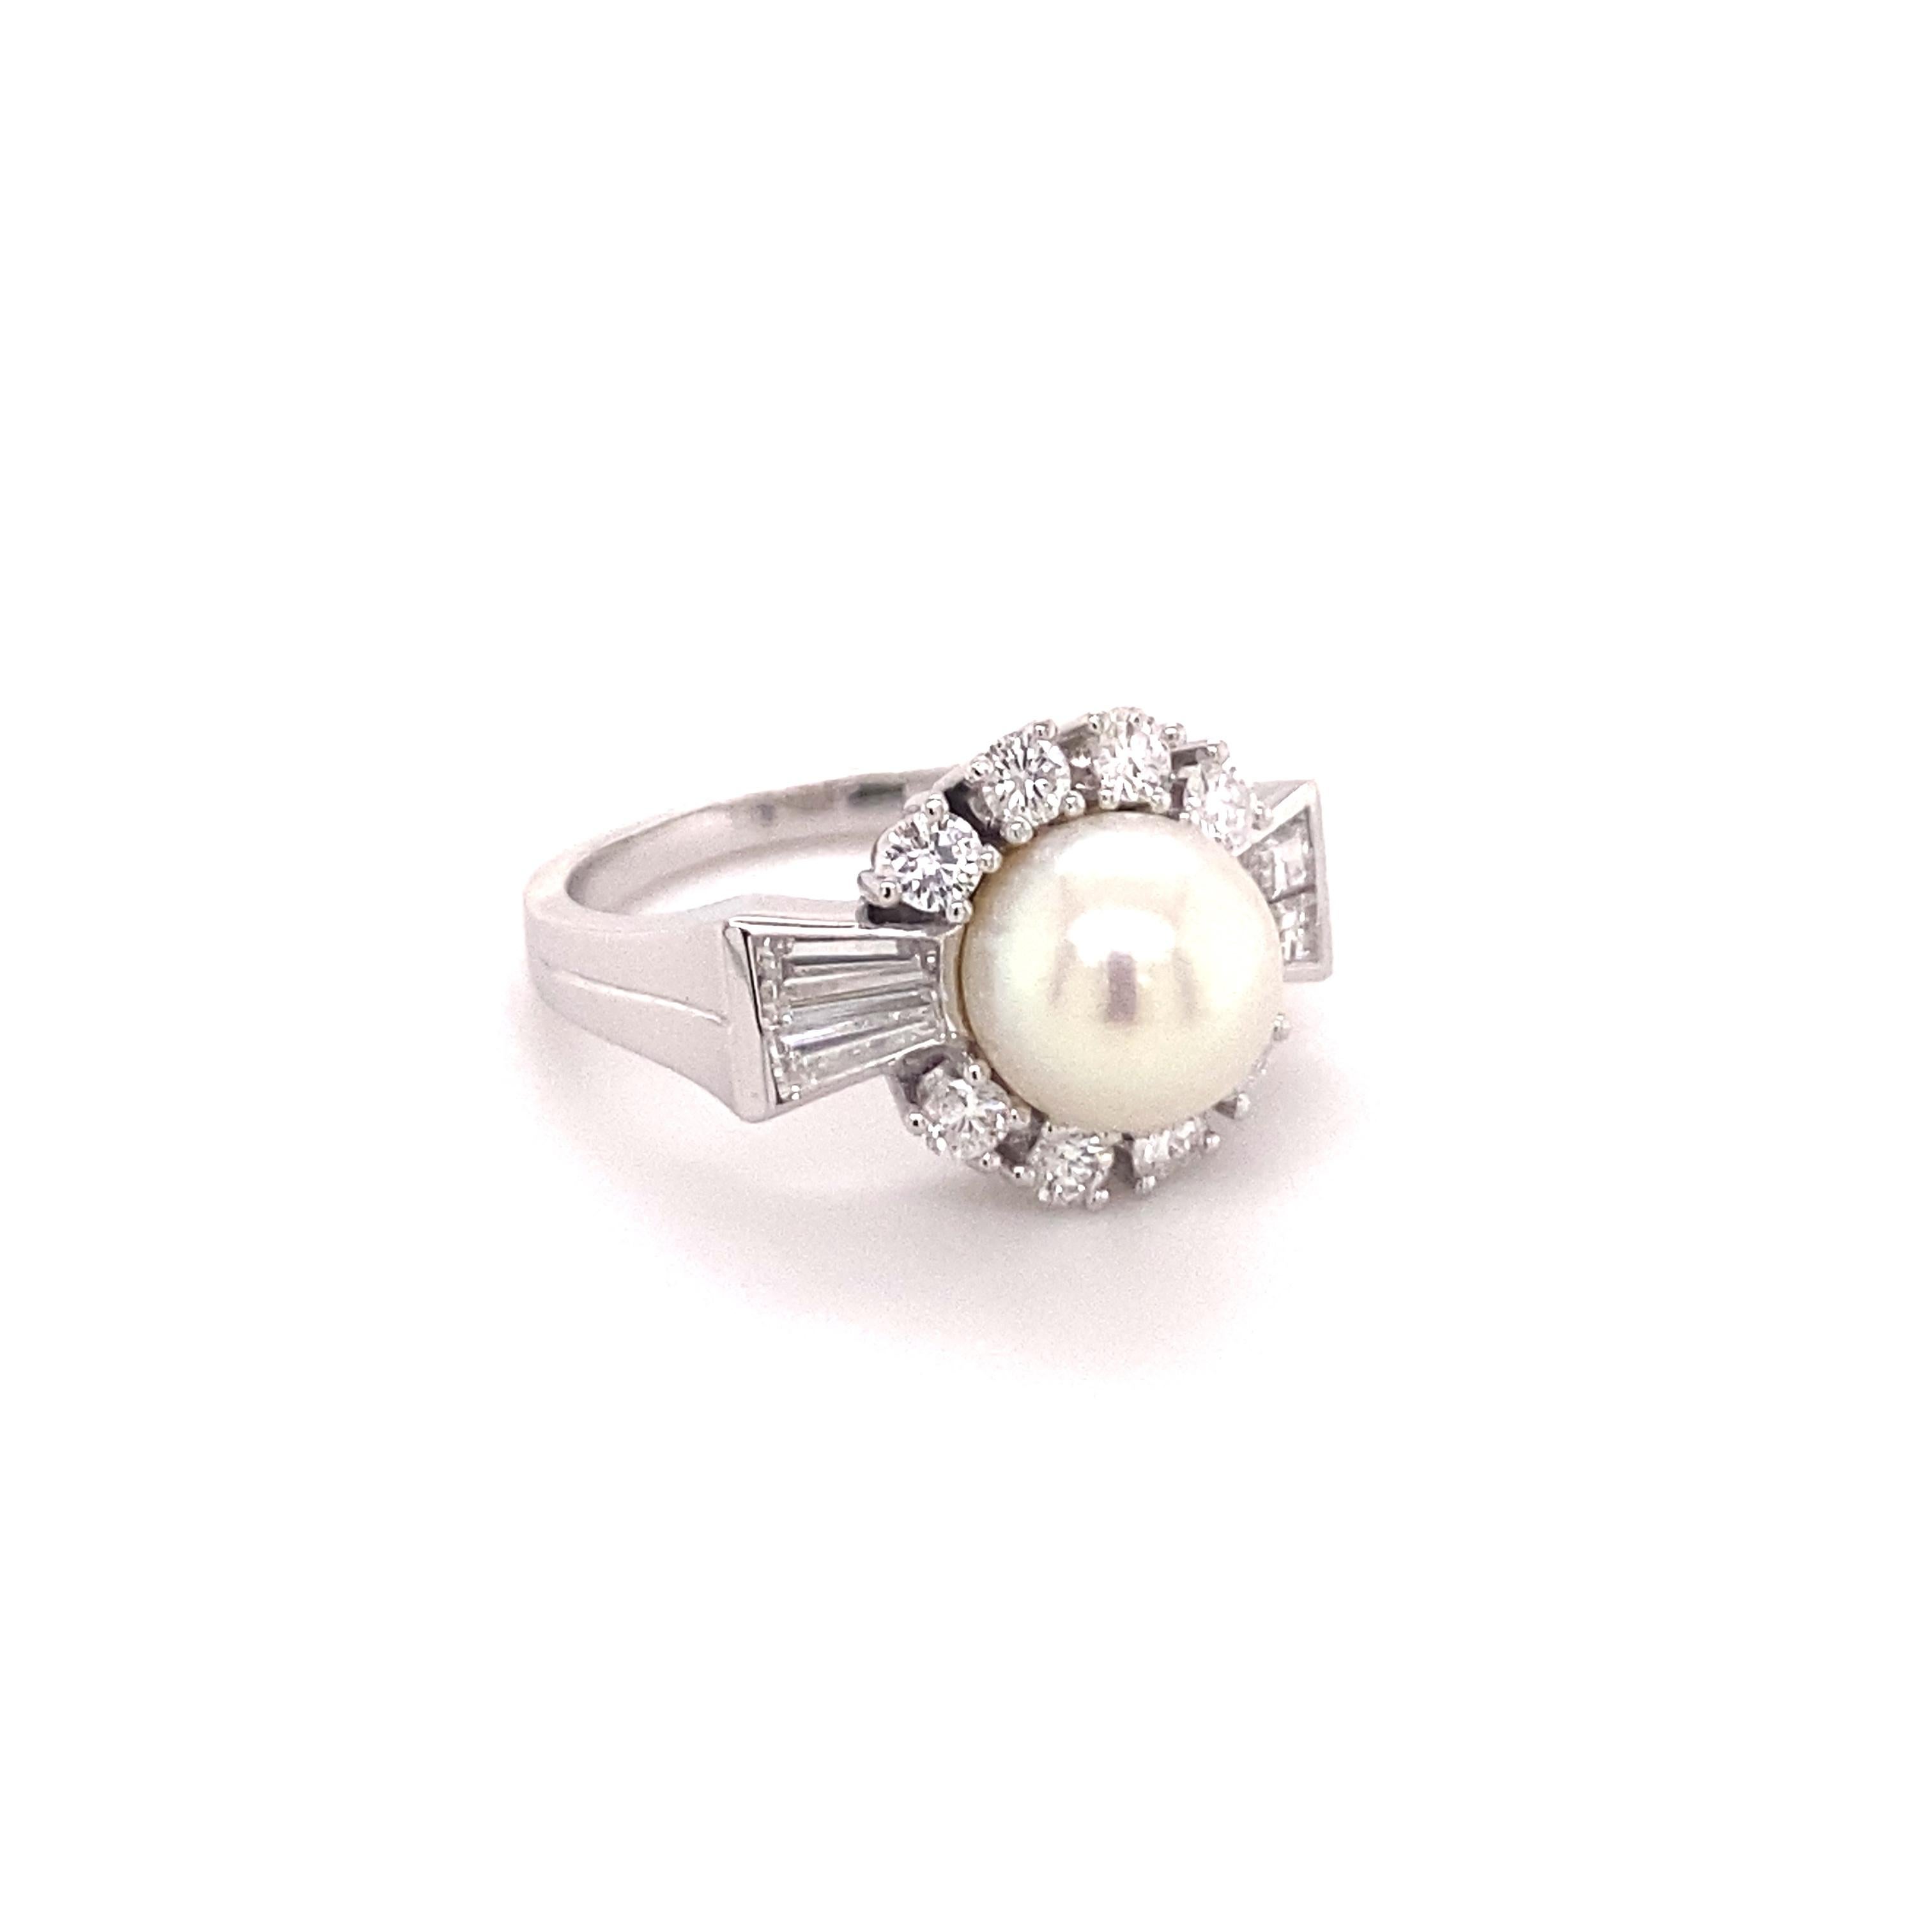 This timelessly elegant ring in 18 karat white gold is set with a white round Akoya cultured pearl of 7.8 mm in diameter. The half-entourage of 8 brilliant-cut diamonds is given a modern twist by the four trapezoid-cut diamonds - two on each side.